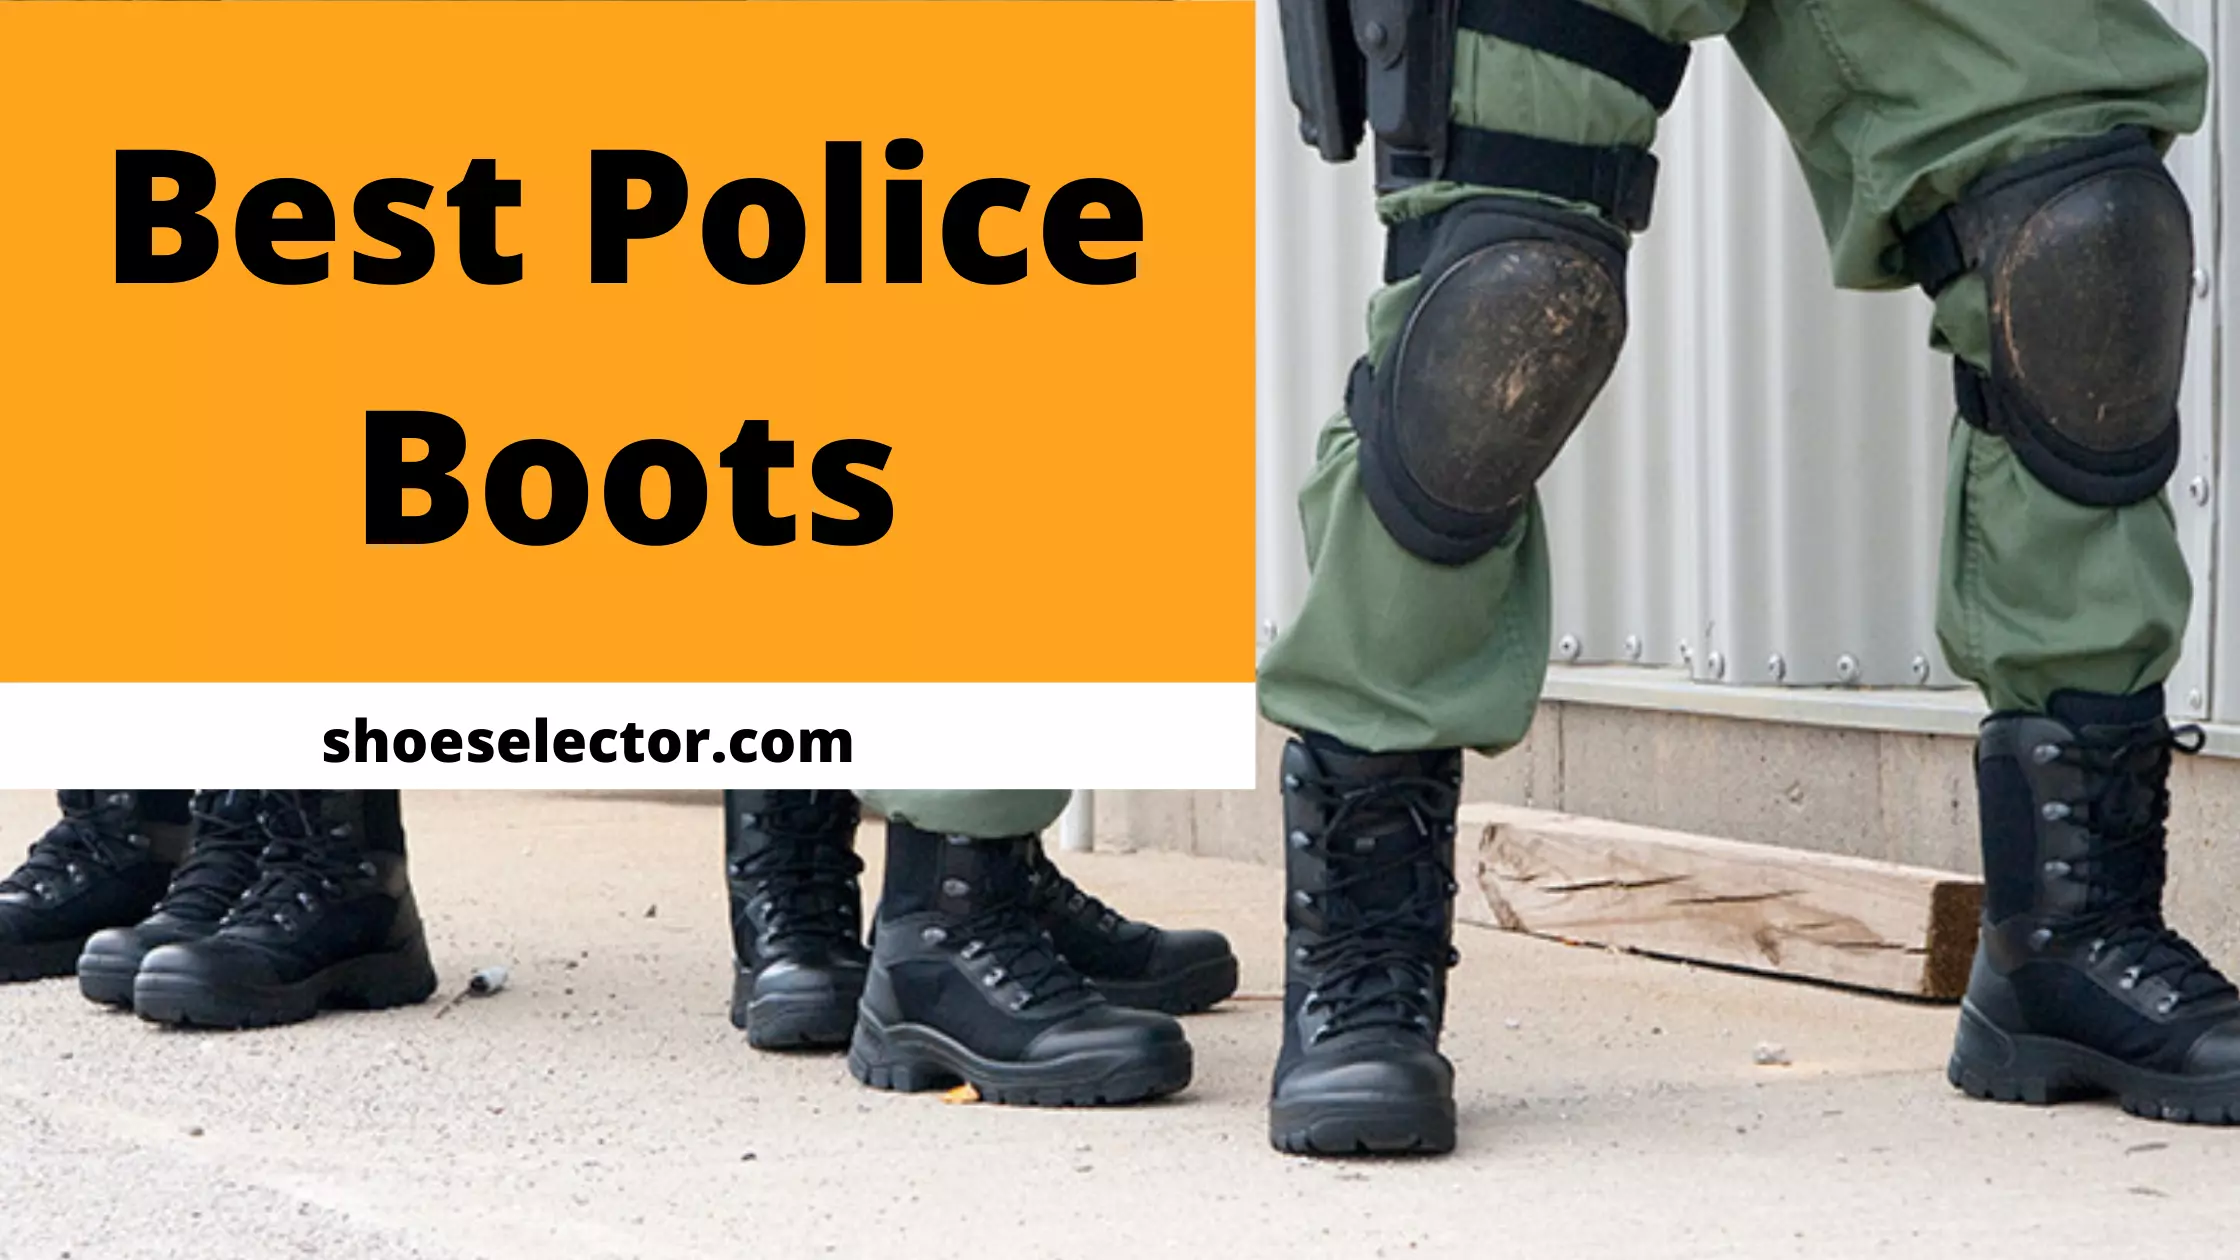 Best Police Boots - Everything You Need To Know